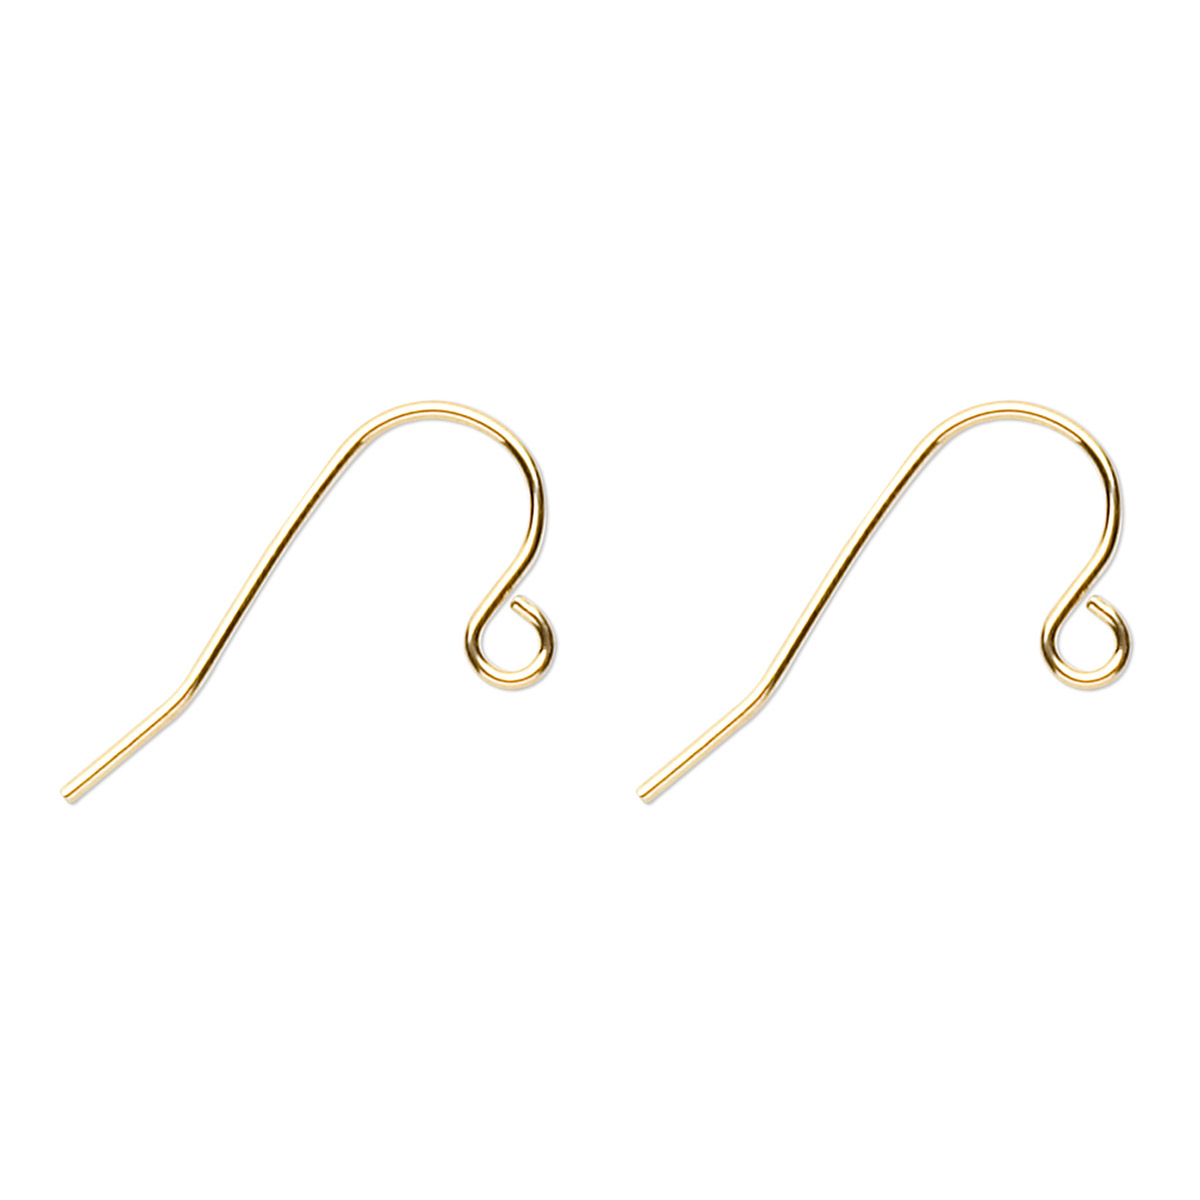 Ear wire, gold-plated stainless steel, 11mm fishhook with open loop, 21 ...